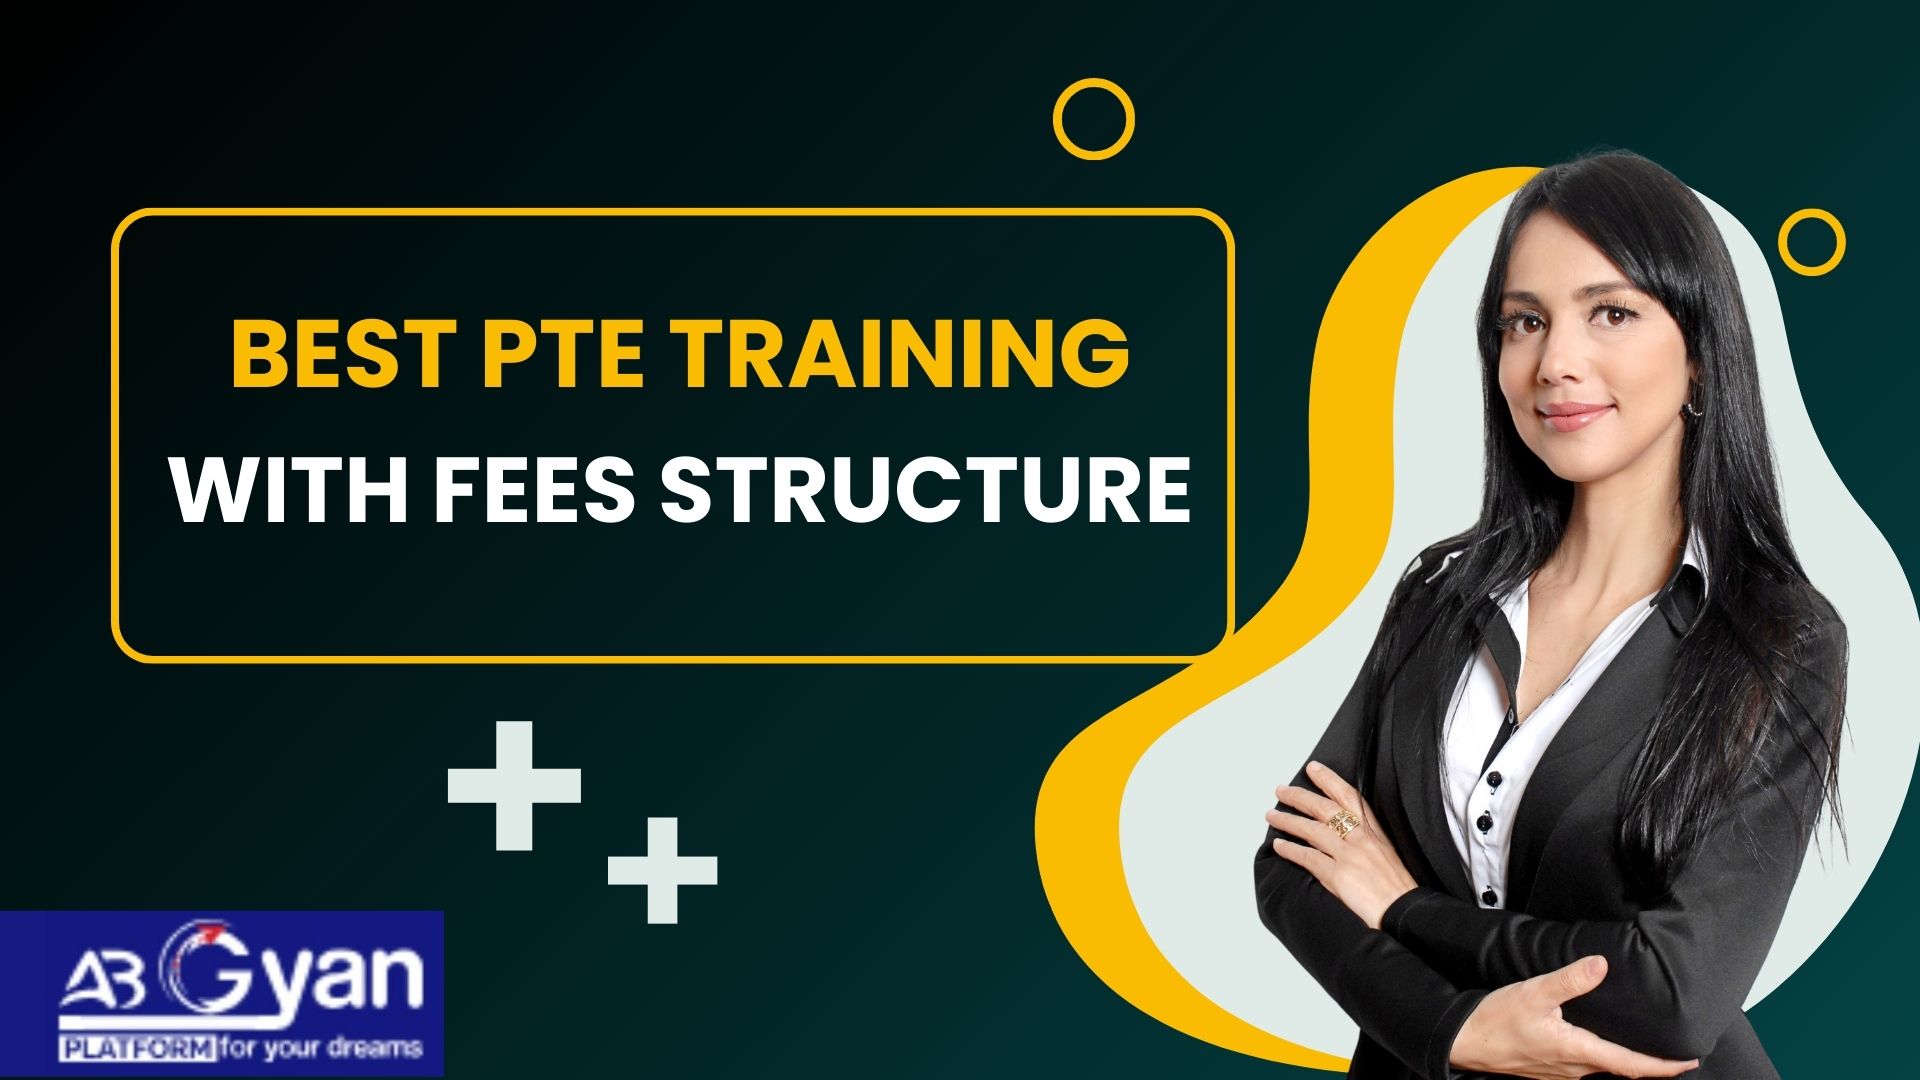 Best PTE Training With Fees Structure - Vita